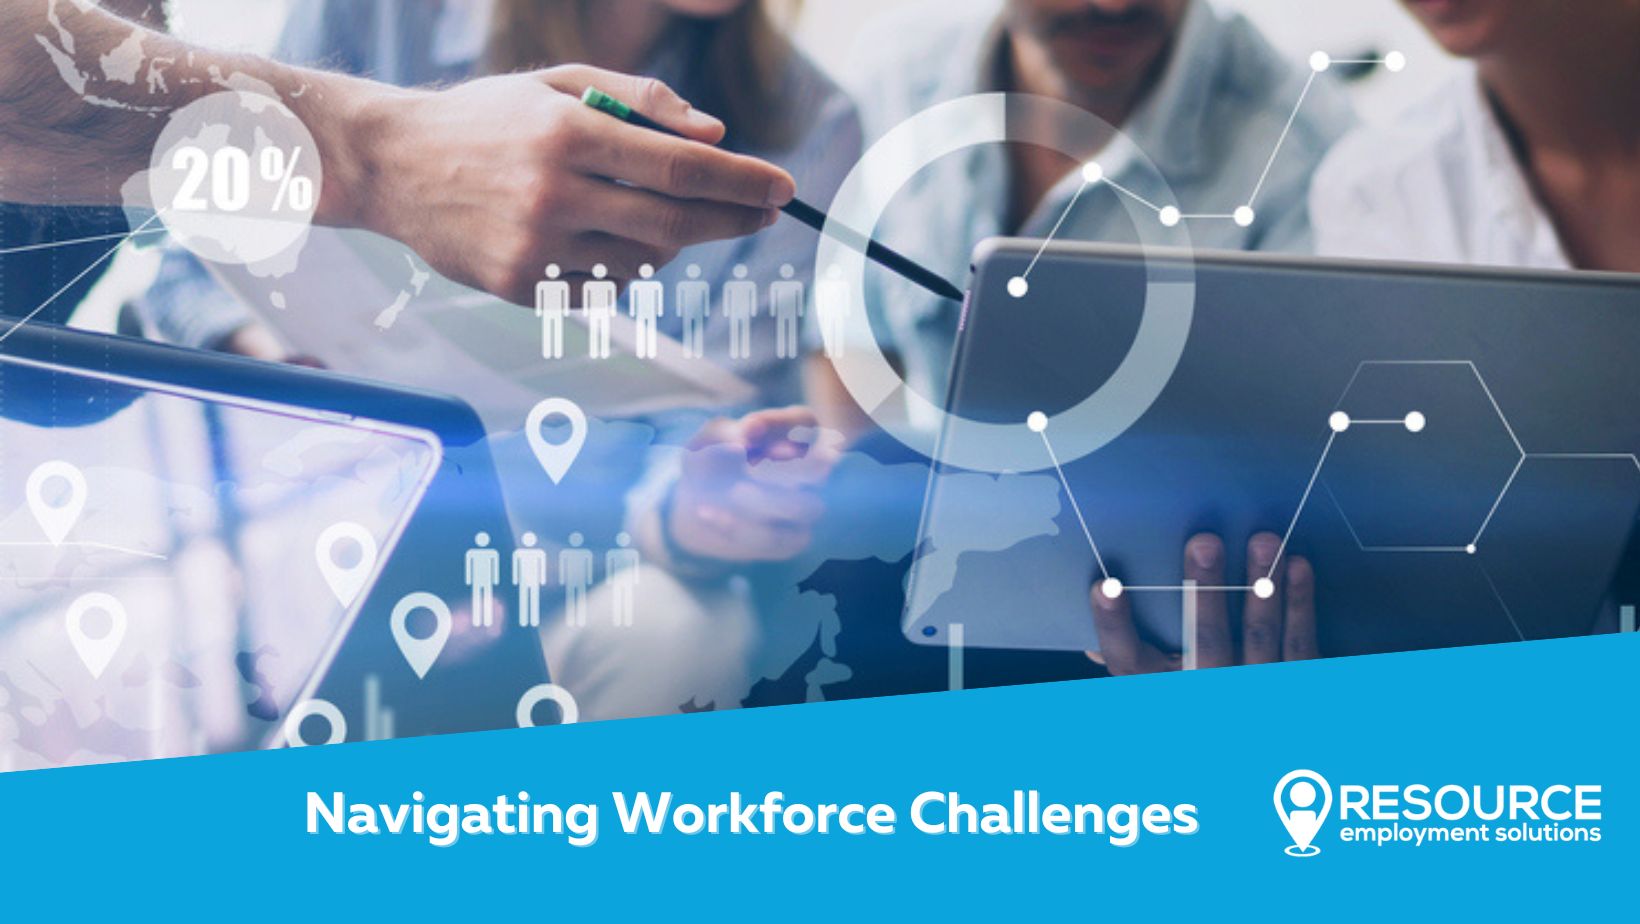 Navigating Workforce Challenges with Resource Employment Solutions